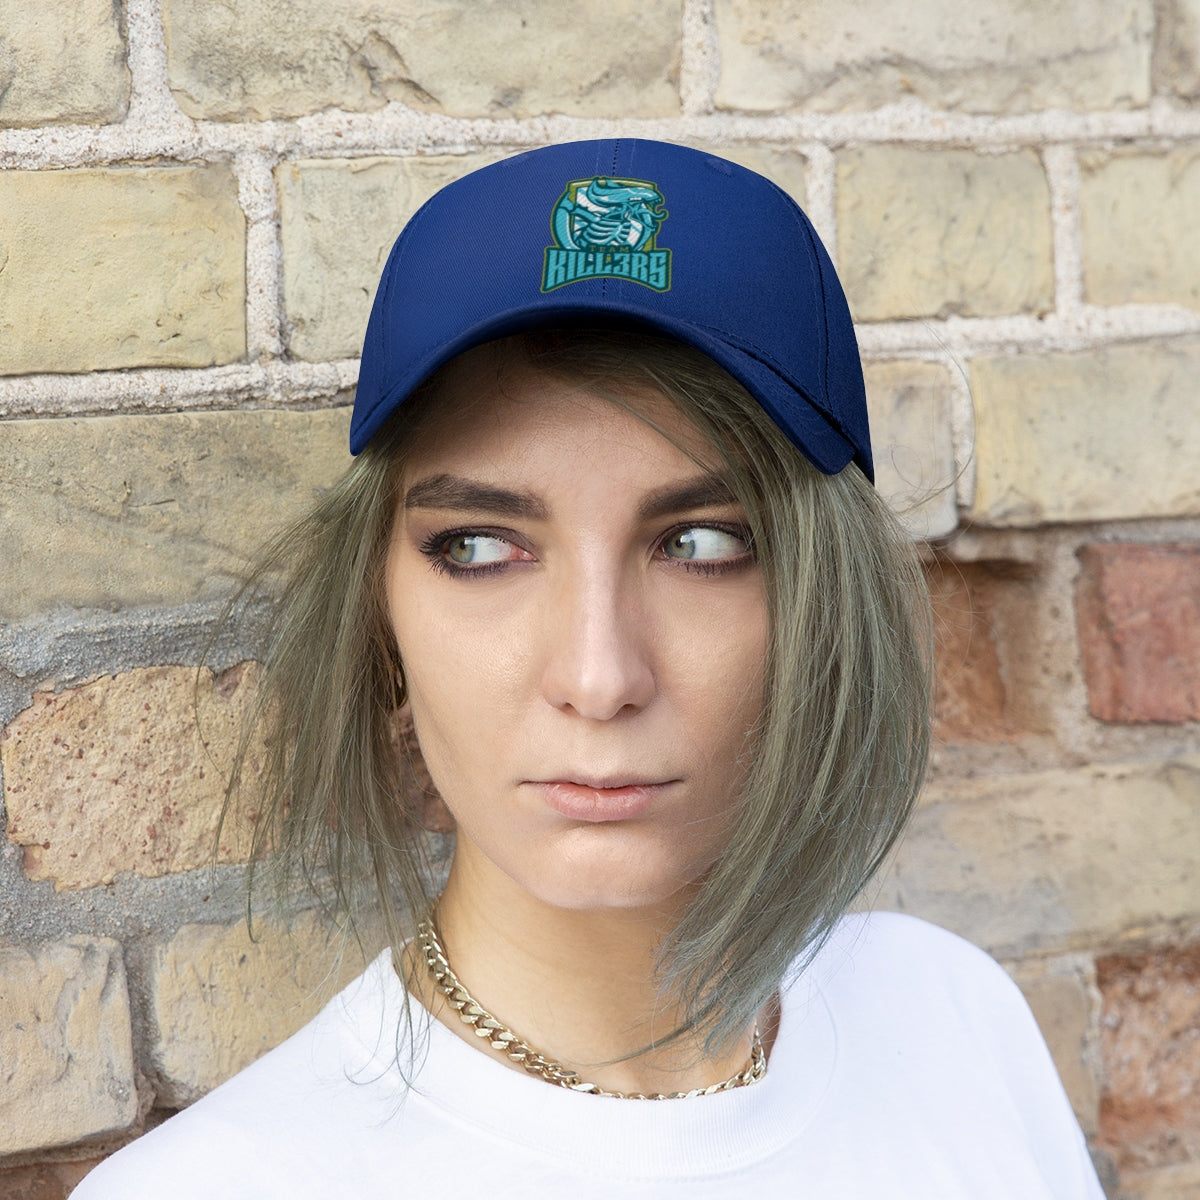 s-ki EMBROIDERED DAD HAT